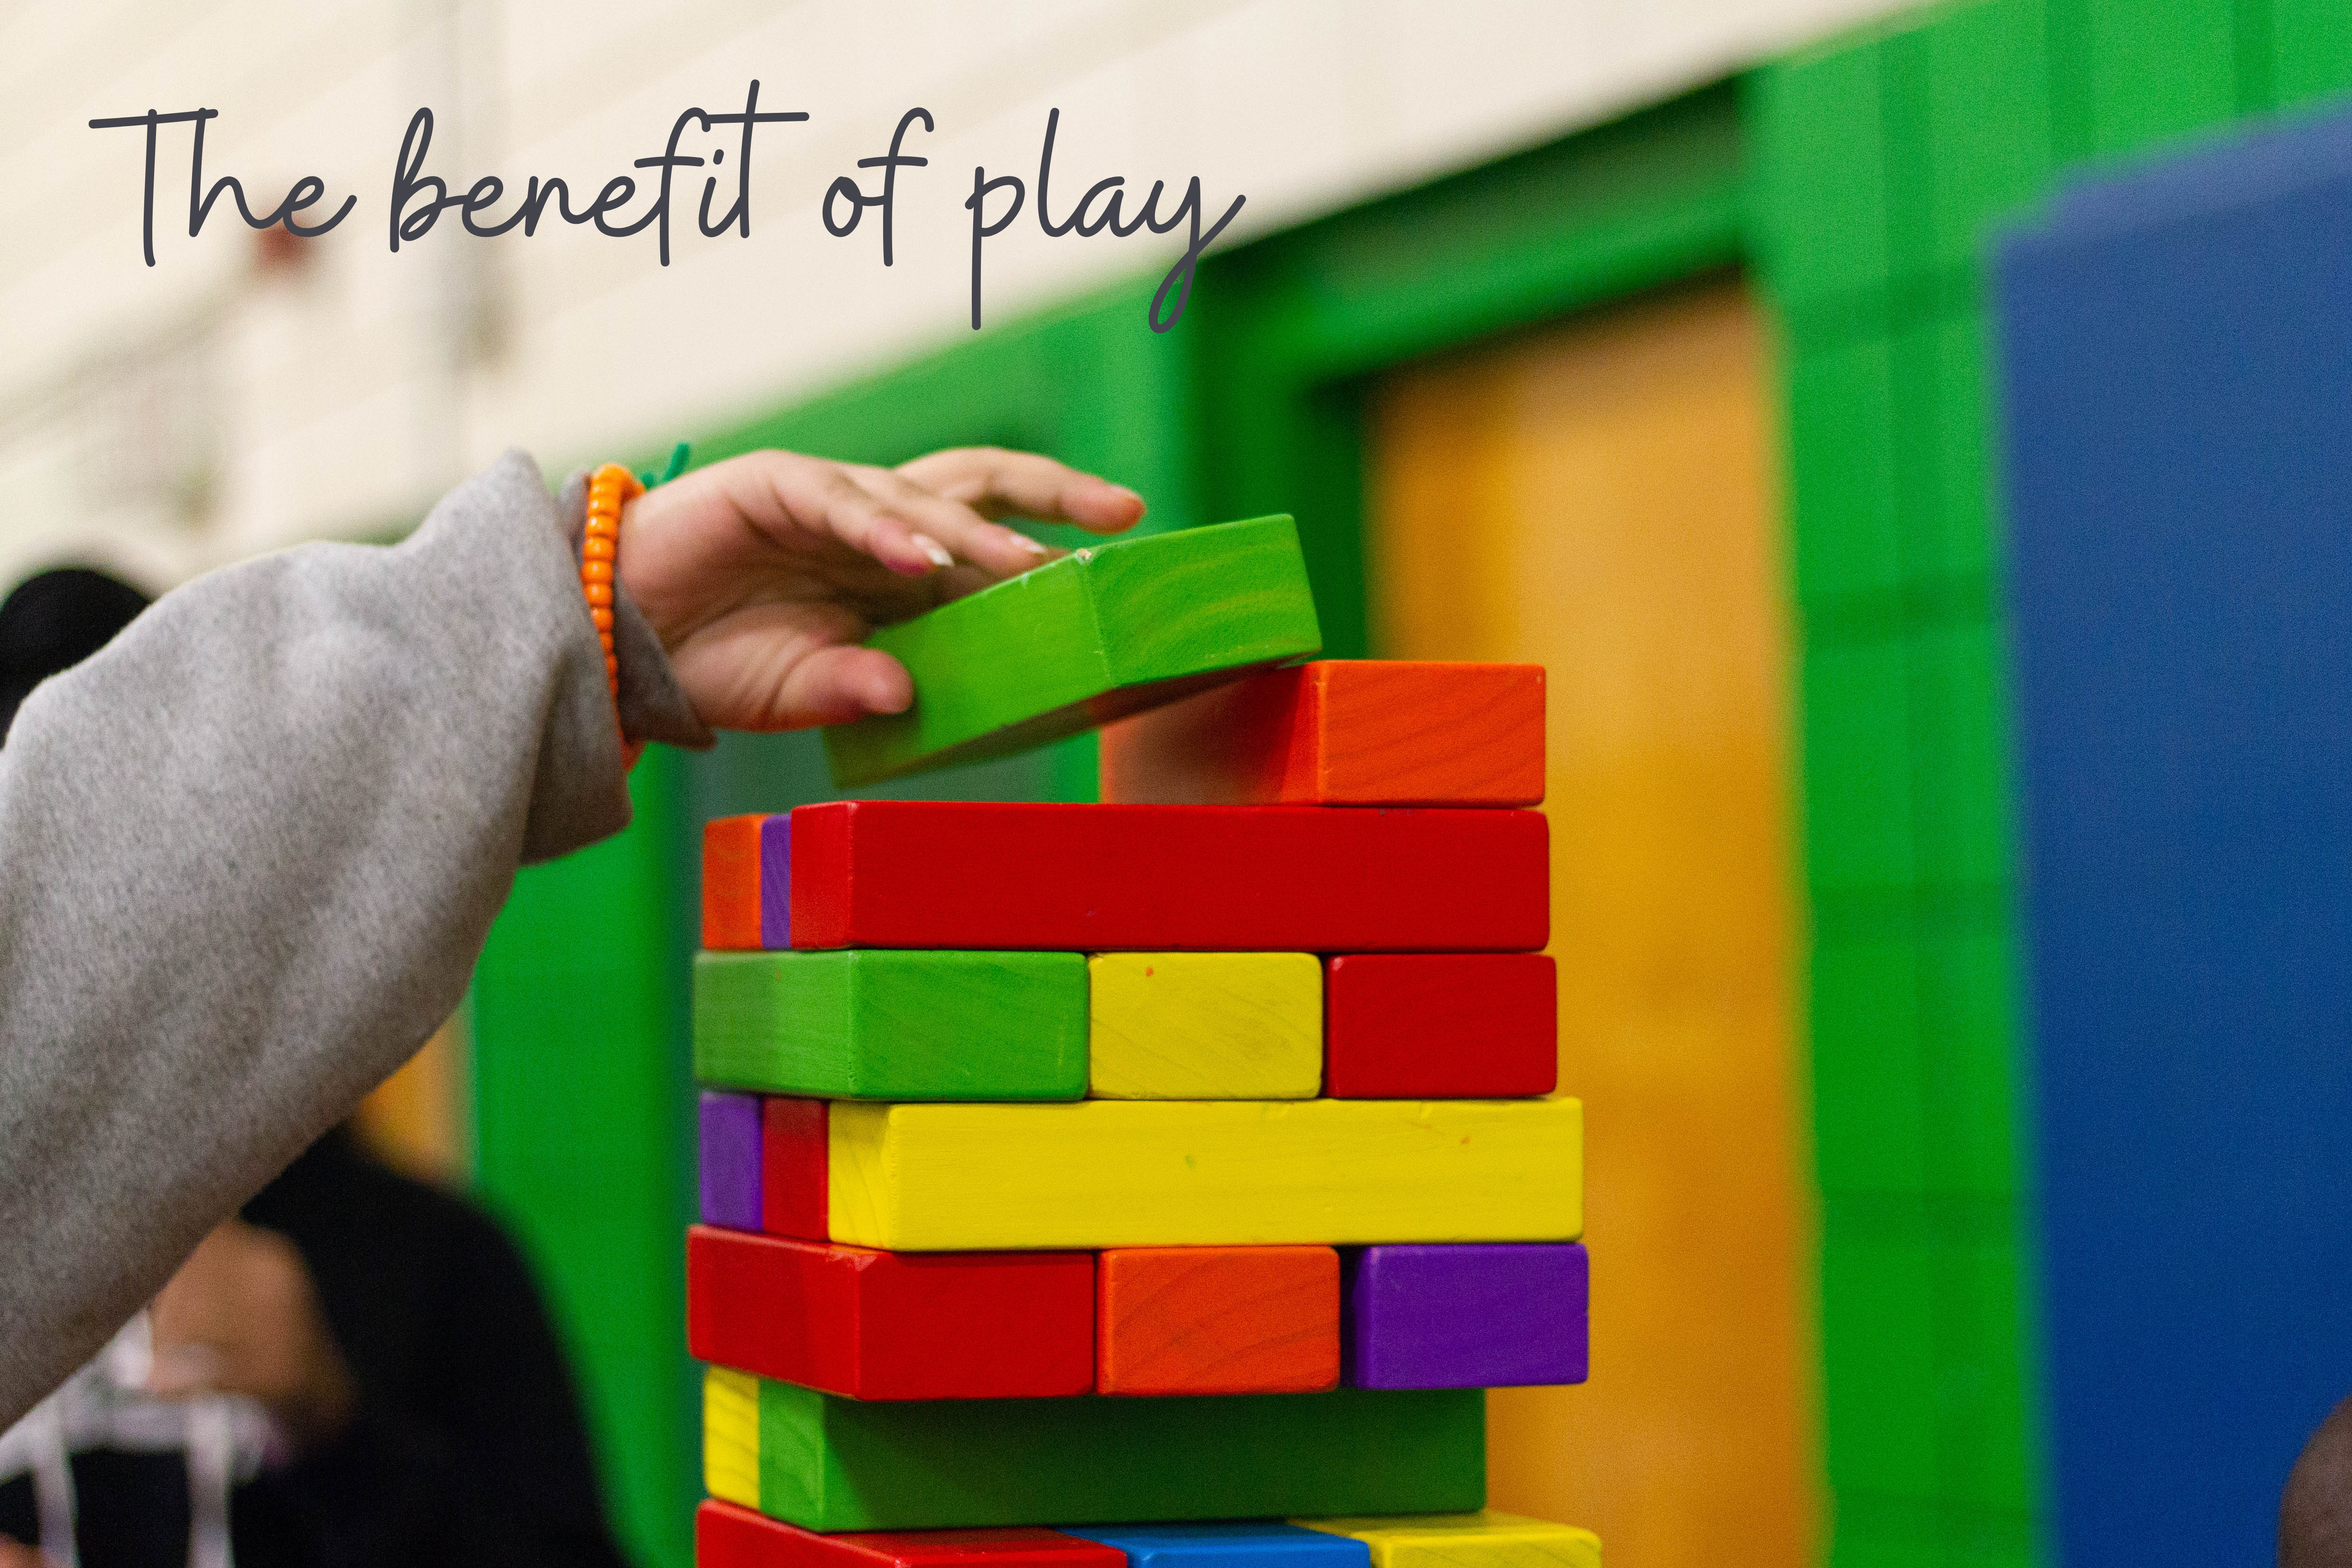 Benefits of Play